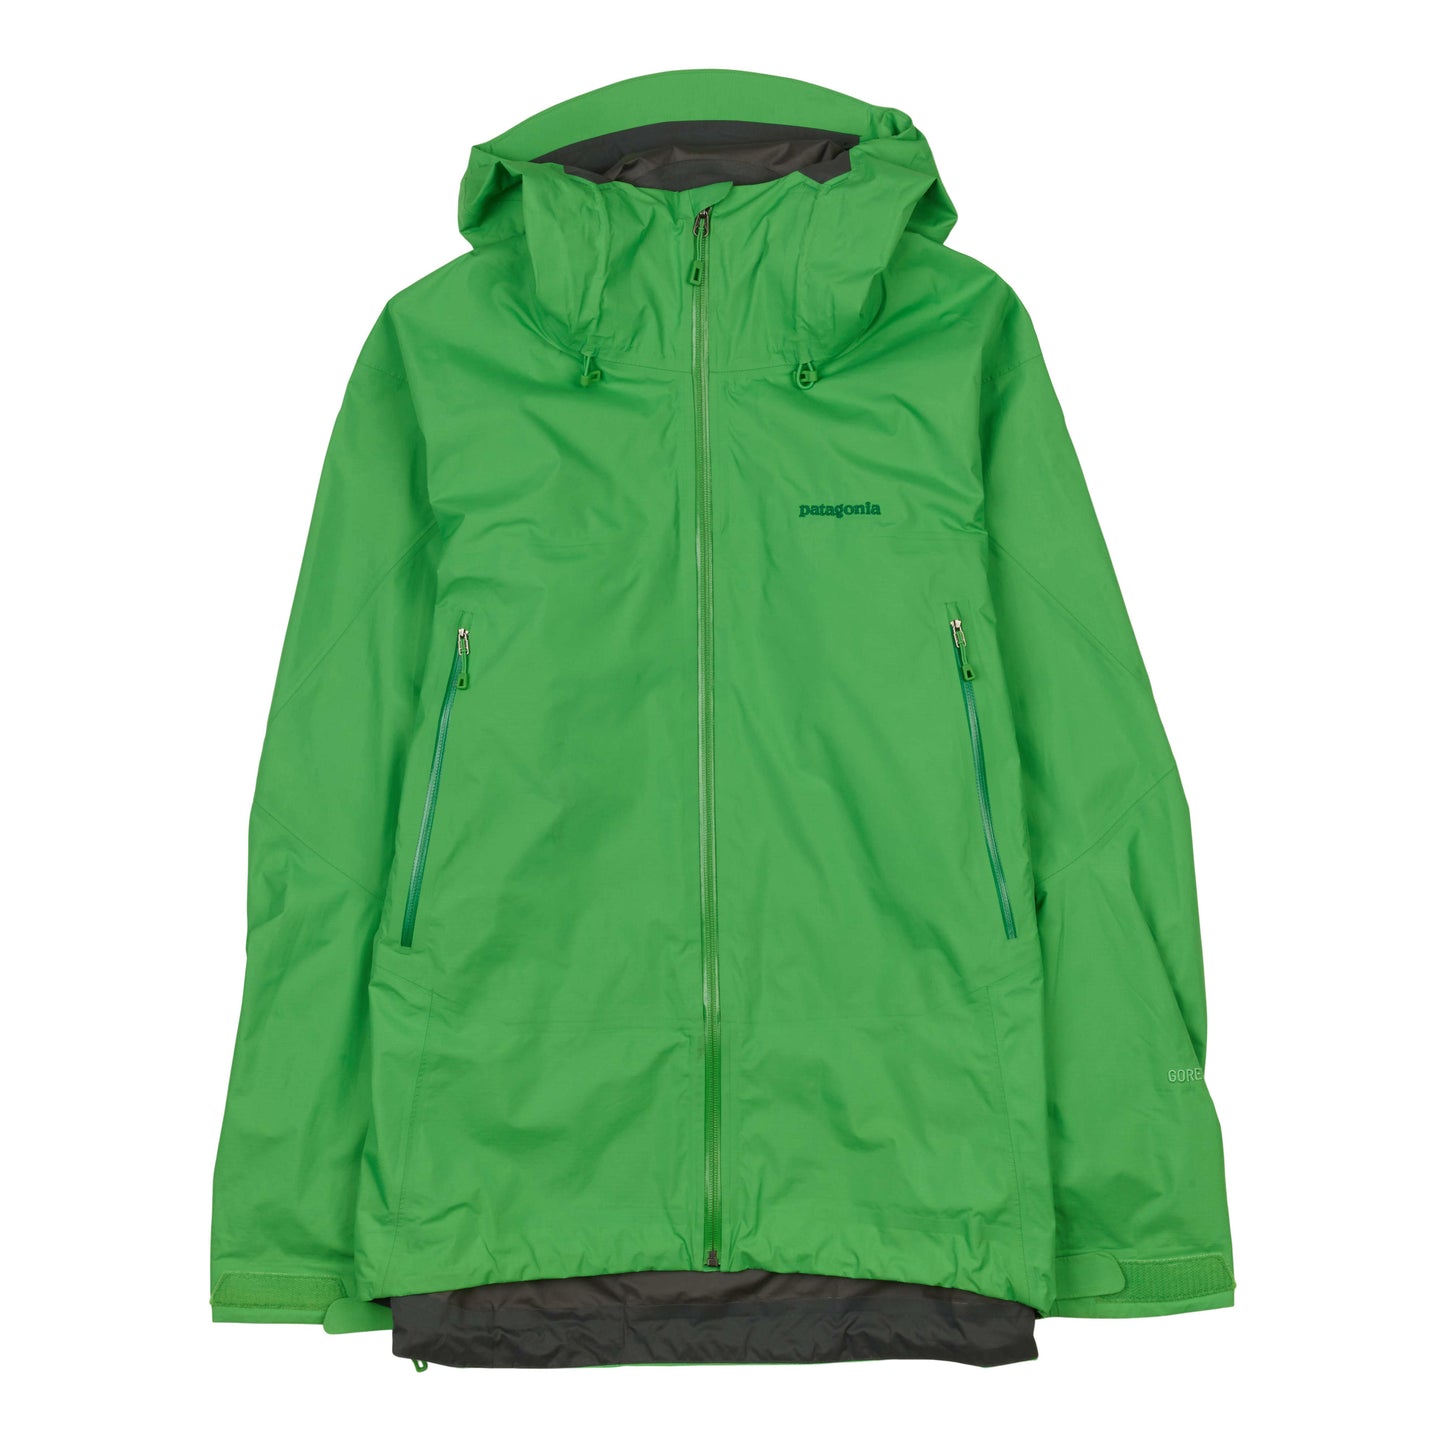 M's Super Cell Jacket